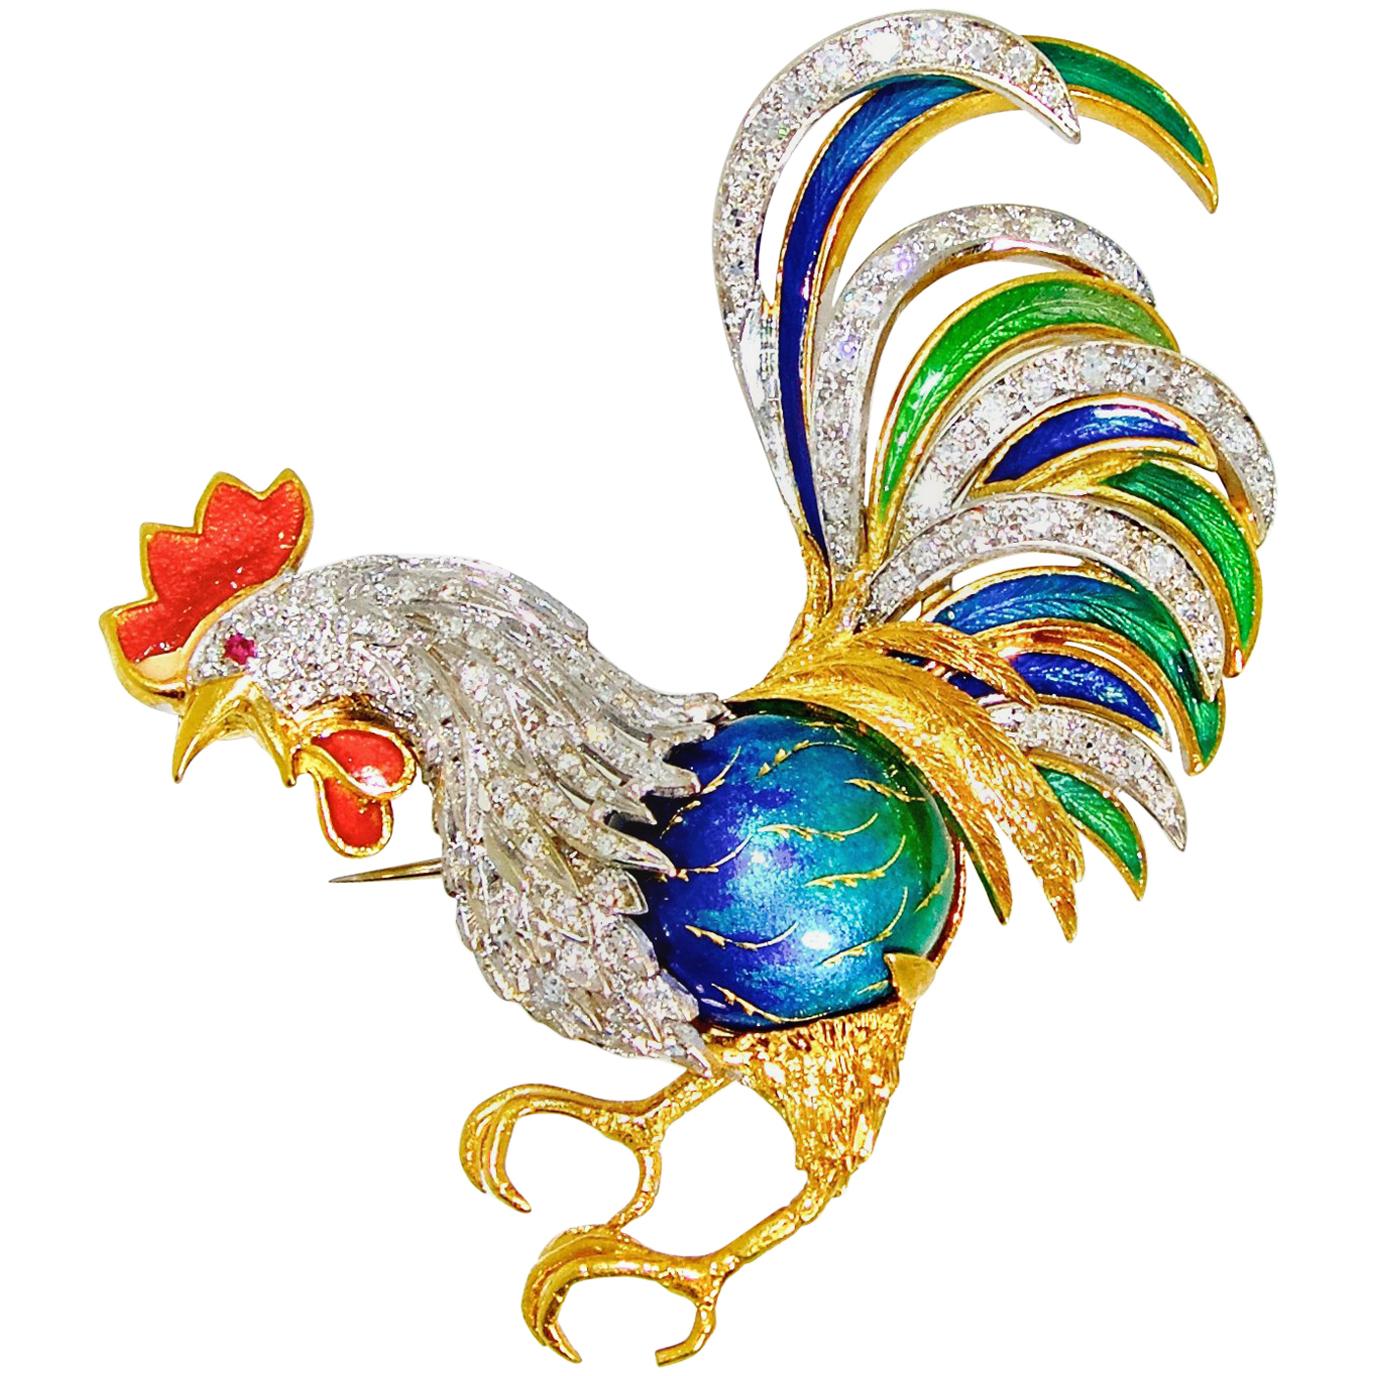 Rooster Brooch in 18 Karat with Diamonds and Enamel